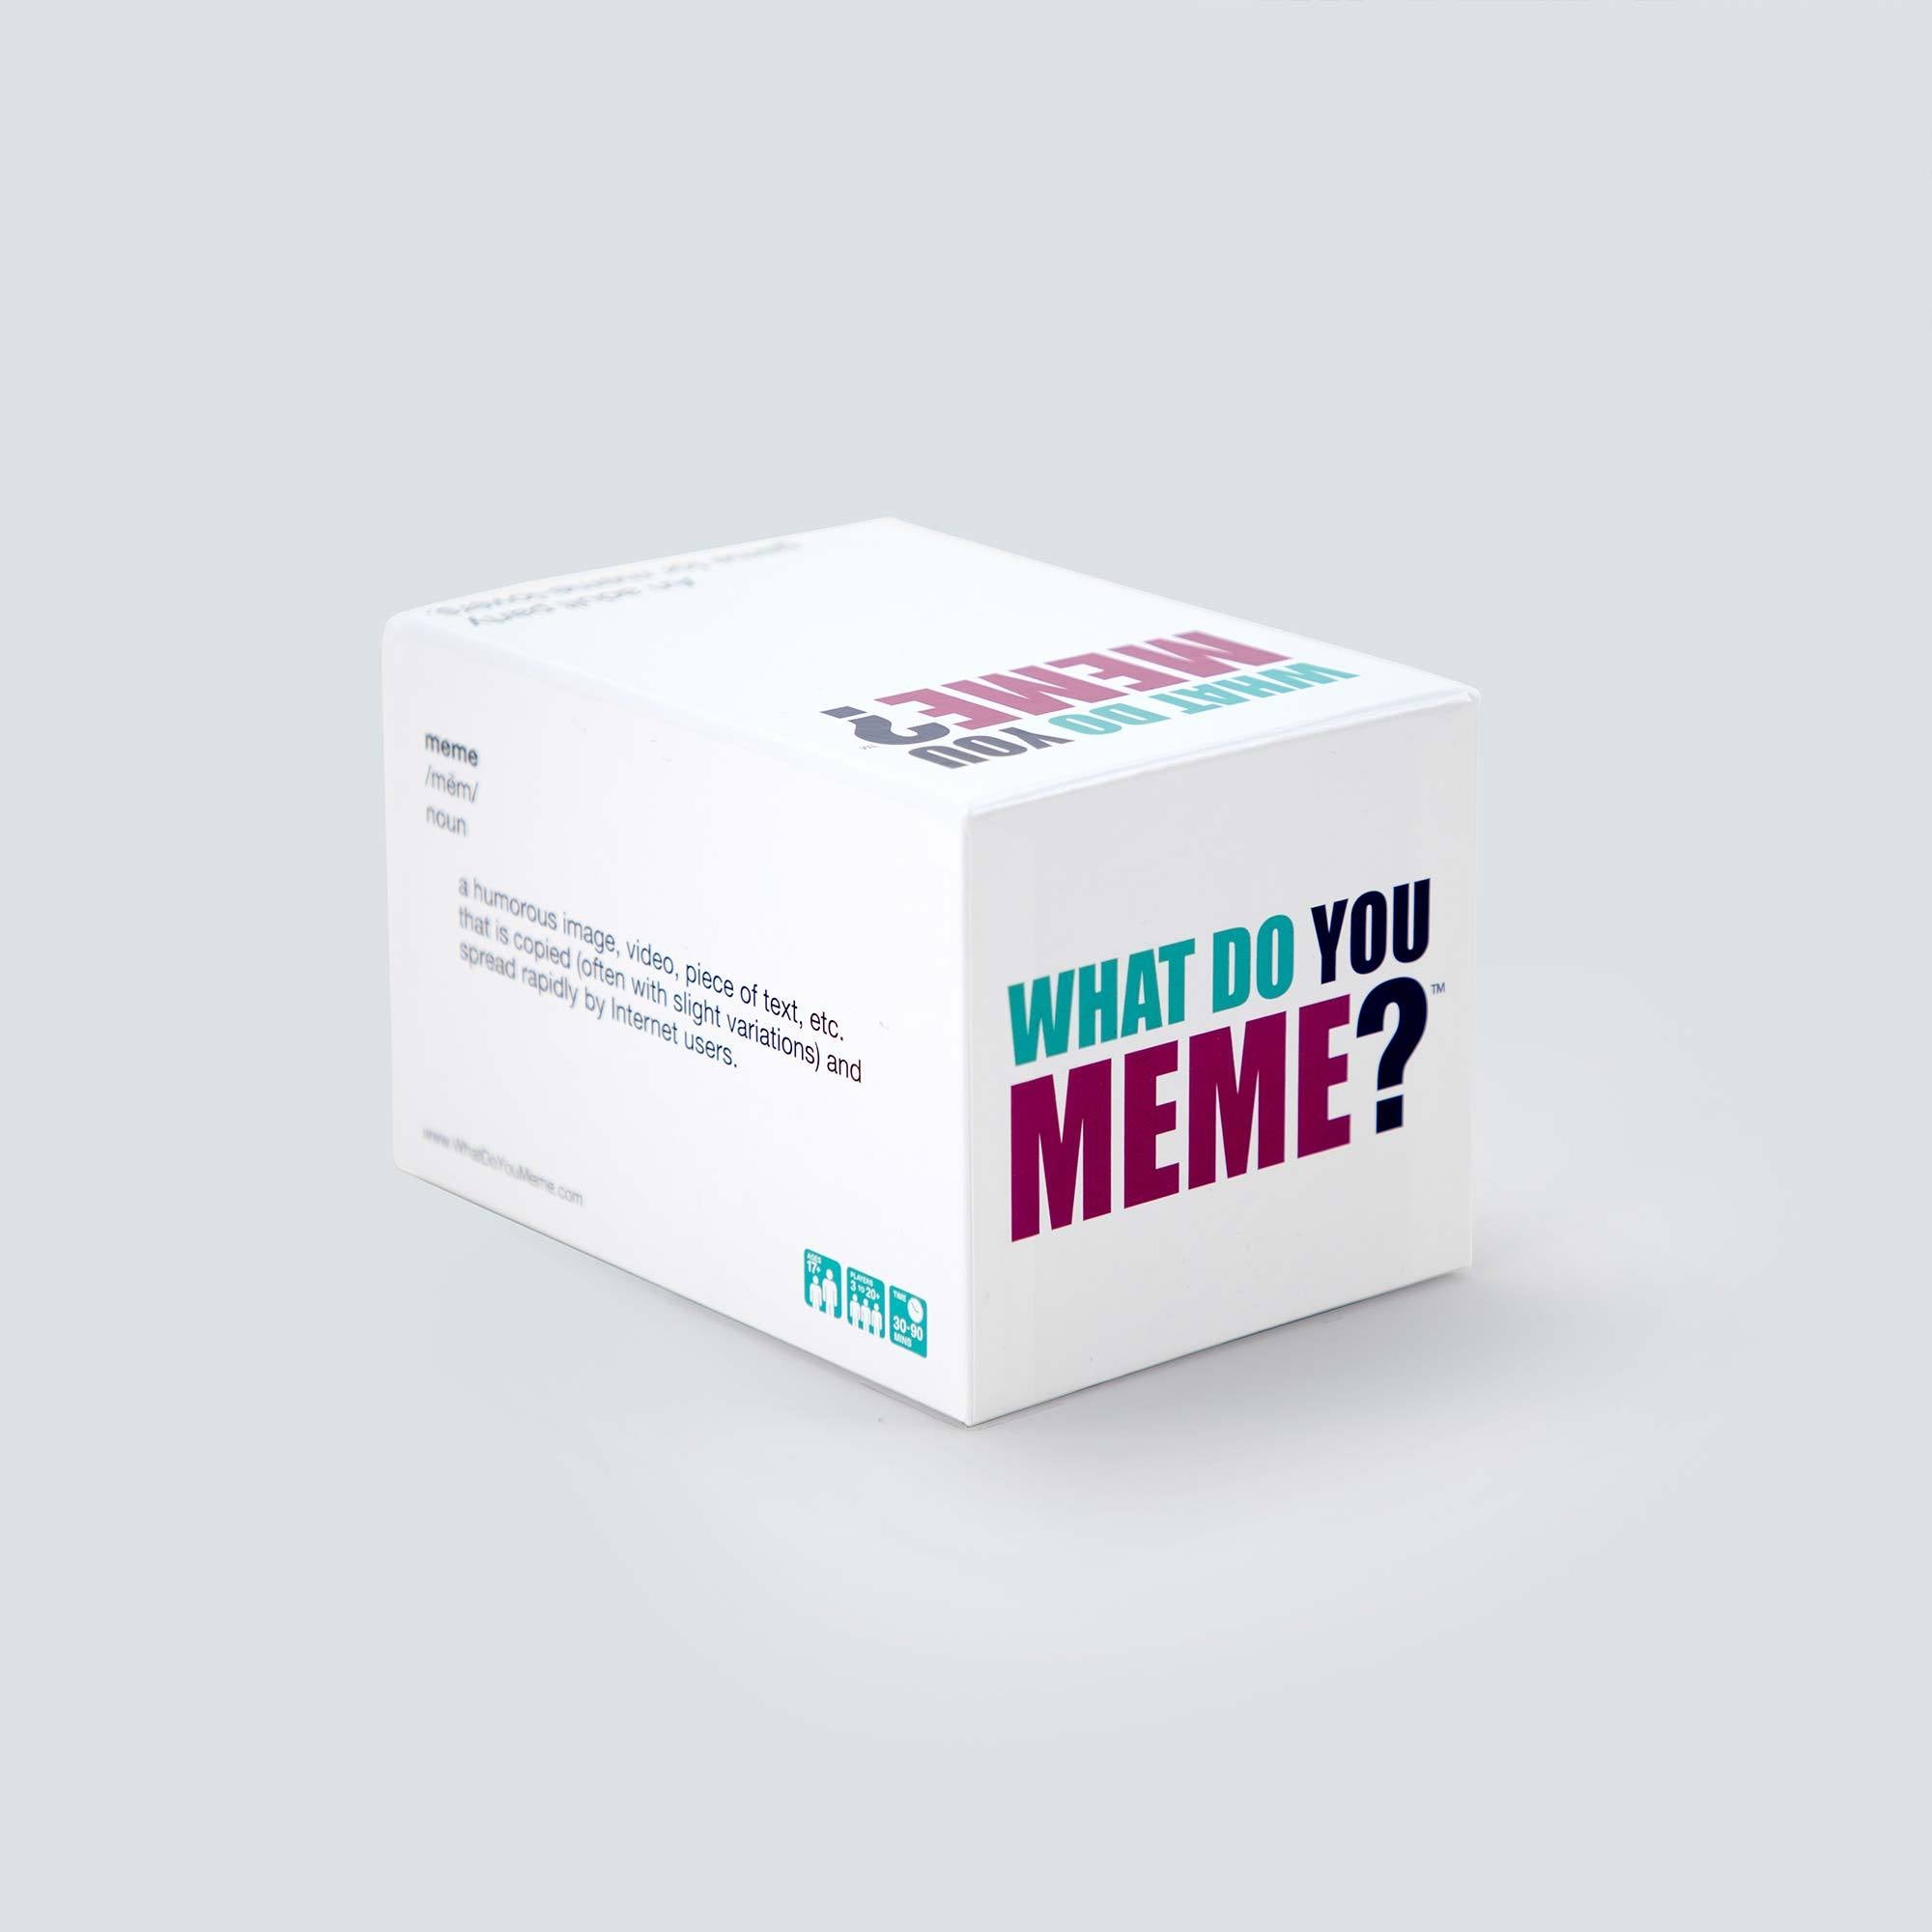 Make It Meme - Play for free - Online Games